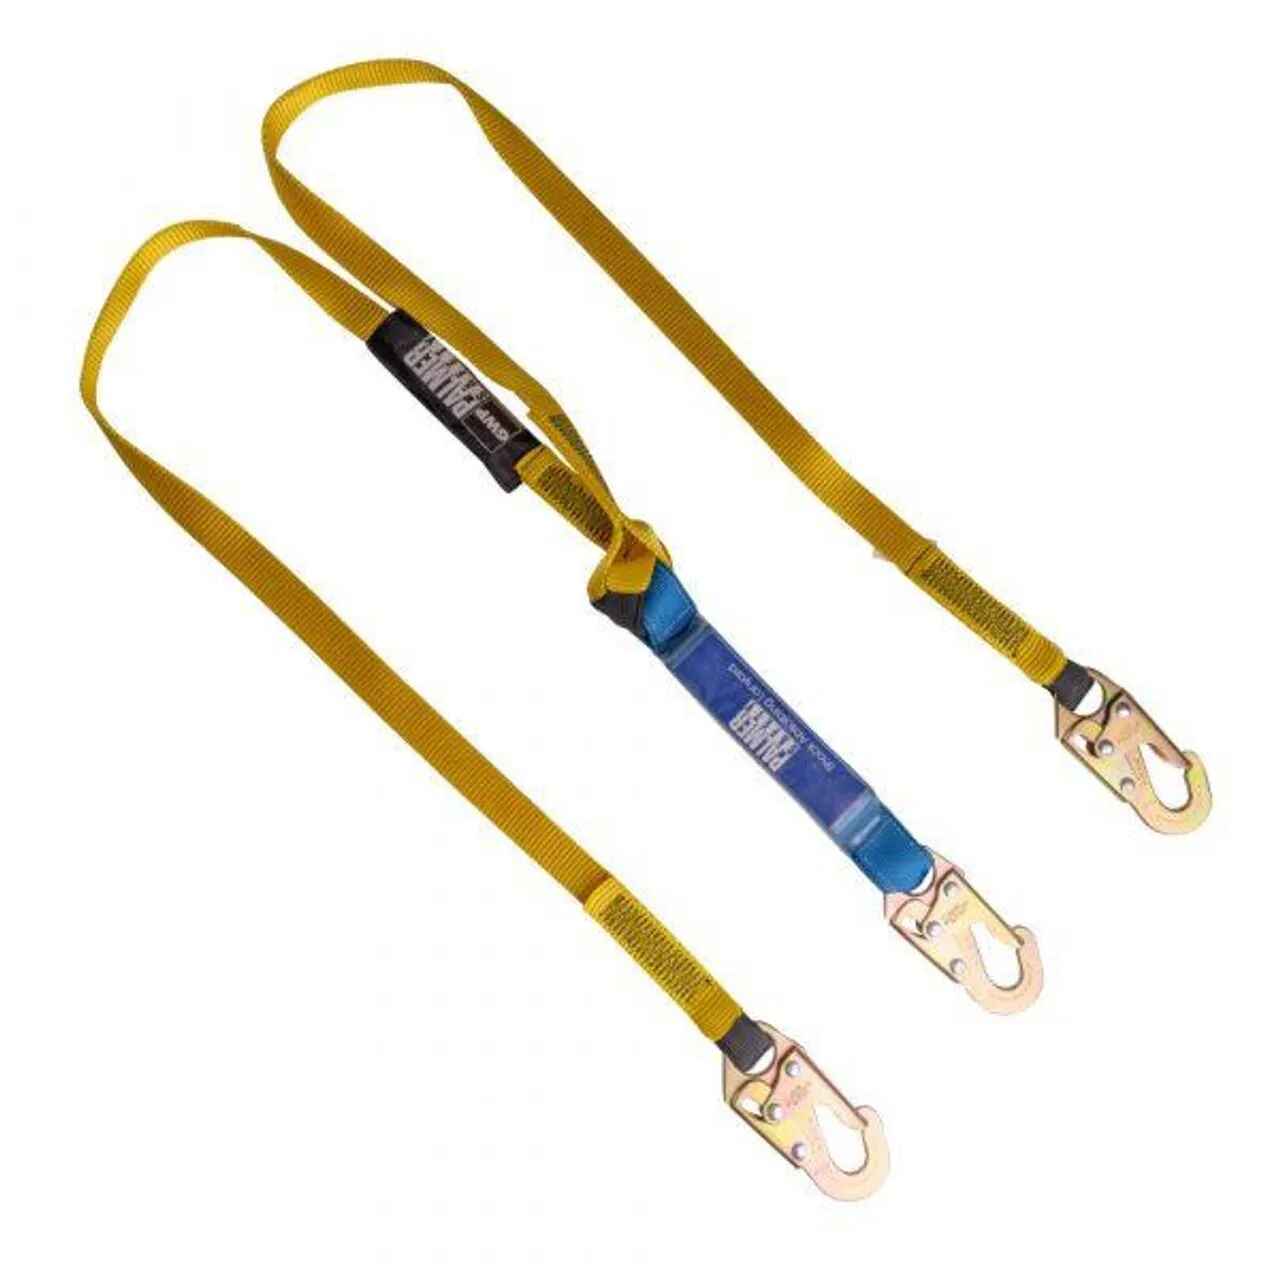 Dual Leg Lanyard 6' with 12' Free Fall. Shock Pack. Small Hooks. - Defender Safety